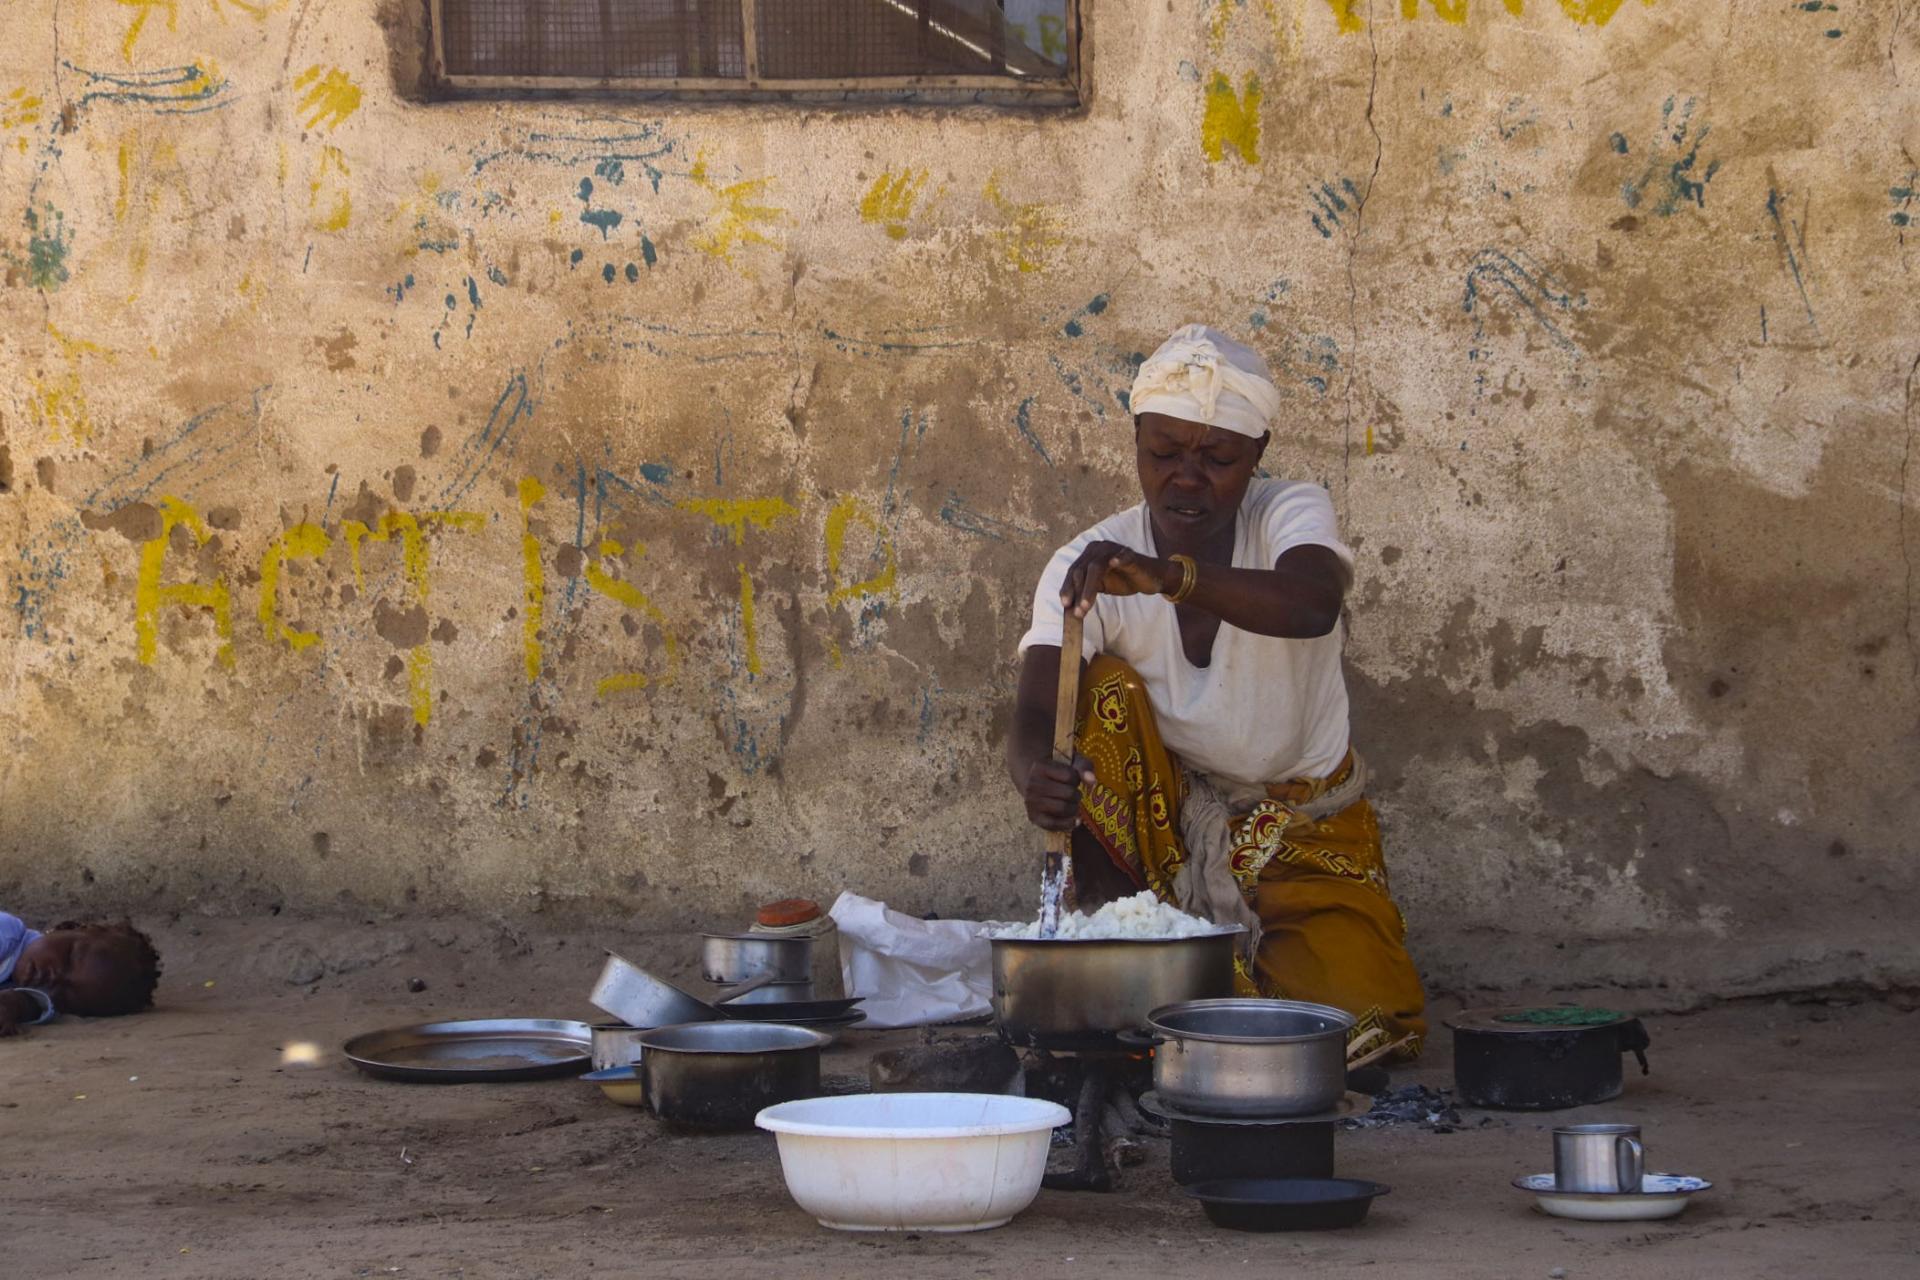 A woman cooking food at internally displaced people's camp. Mozambique, June 2020